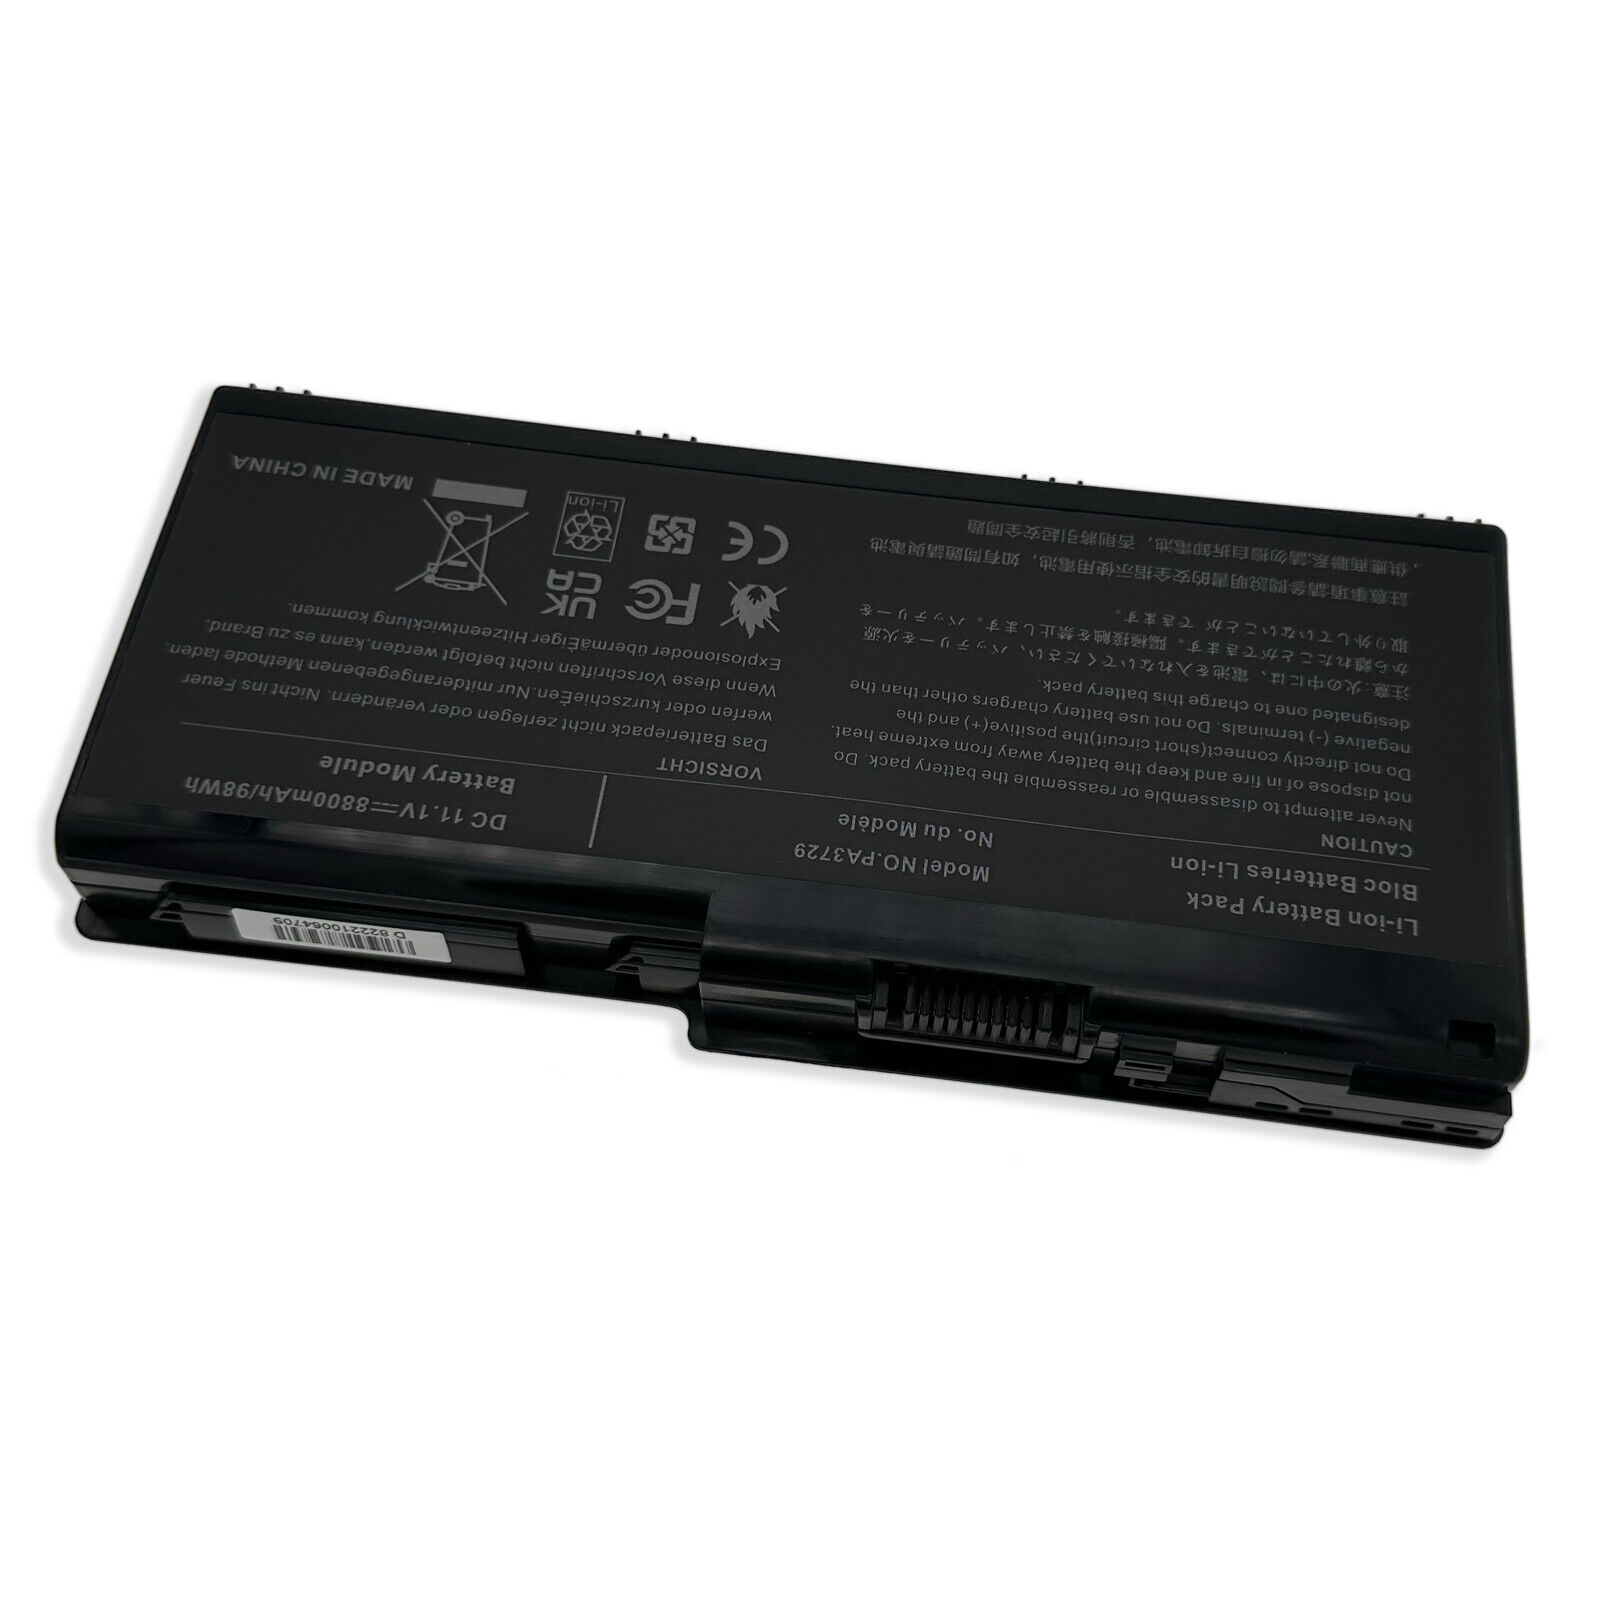 New 12Cell Laptop Battery For Toshiba Satellite P505-S8950 P505-S8946 P505-S8945